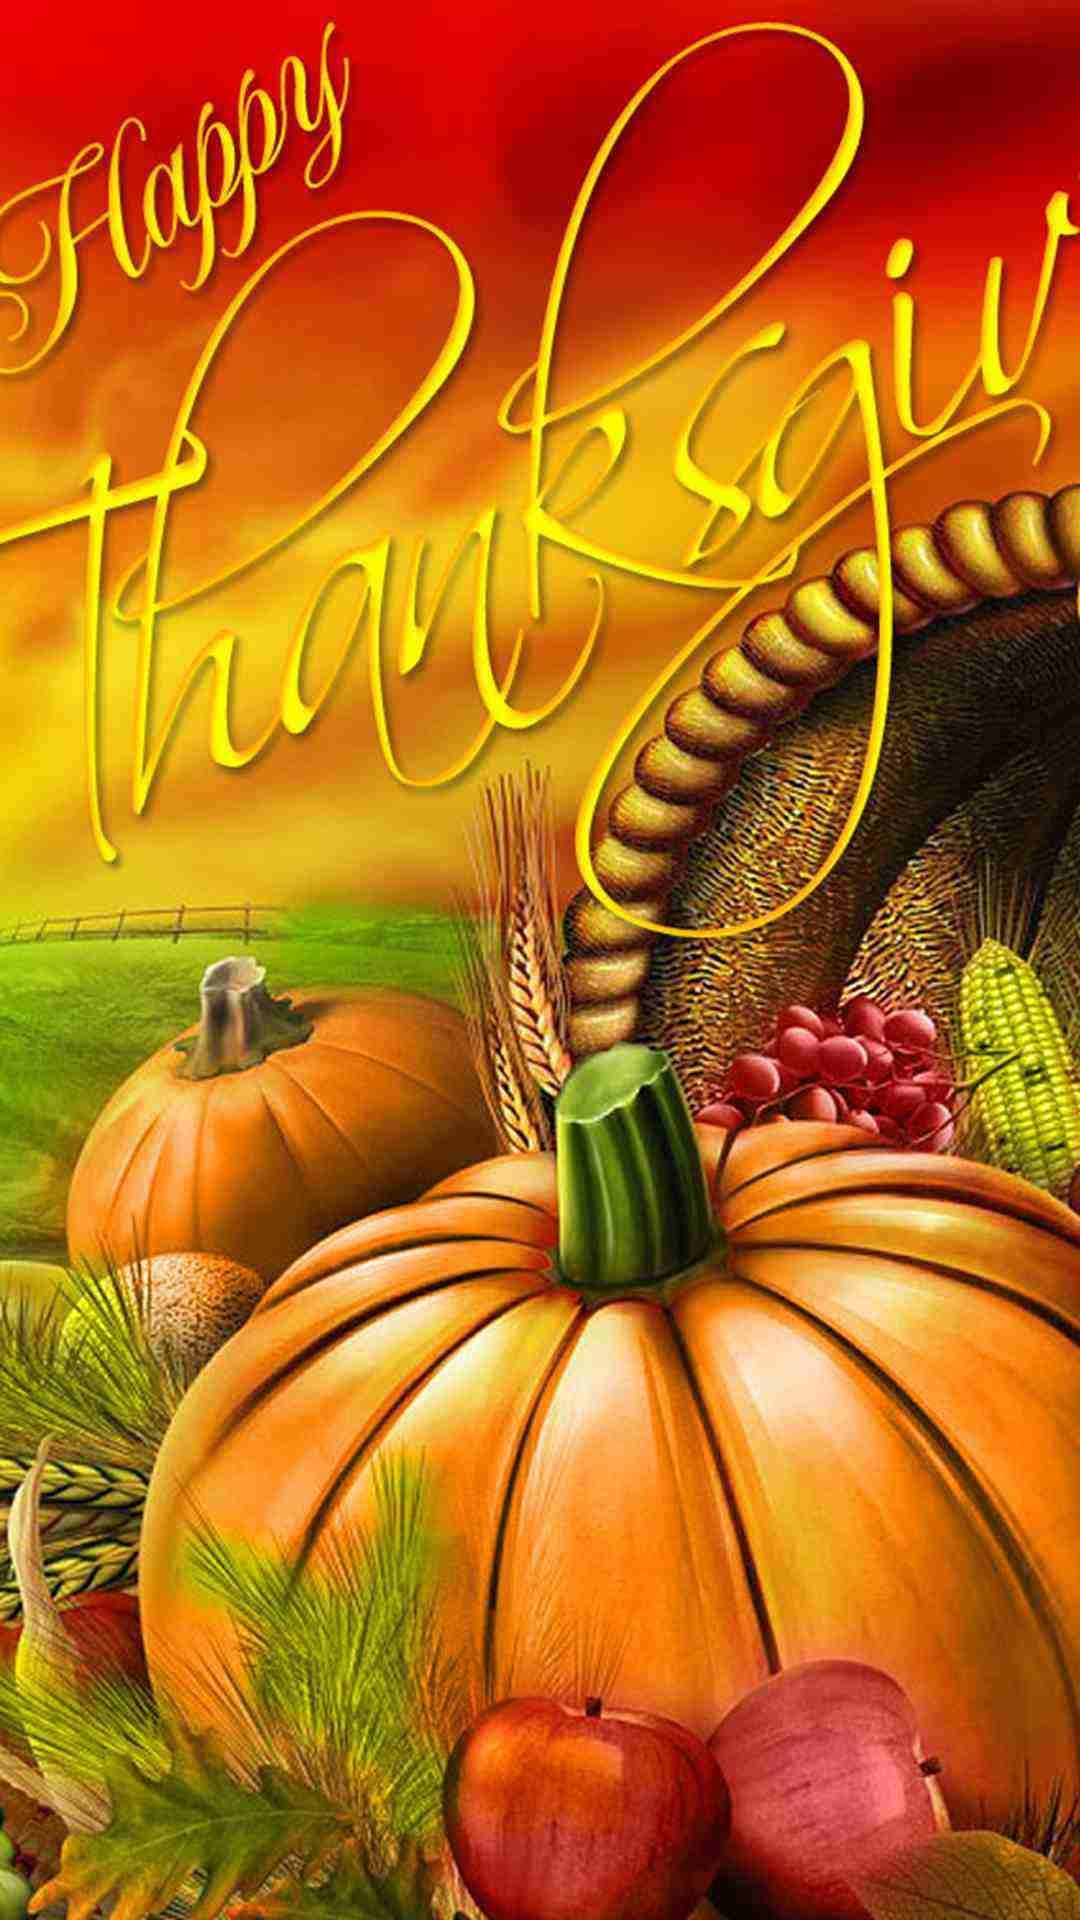 1080x1920 Free download 57 Thanksgiving Scenes Wallpapers on WallpaperPlay [] for your Desktop, Mobile \u0026 Tablet | Explore 69+ Thanksgiving 2015 Wallpaper | Free Thanksgiving Wallpapers, Happy Thanksgiving Wallpaper, Thanksgiving Wallpaper Background